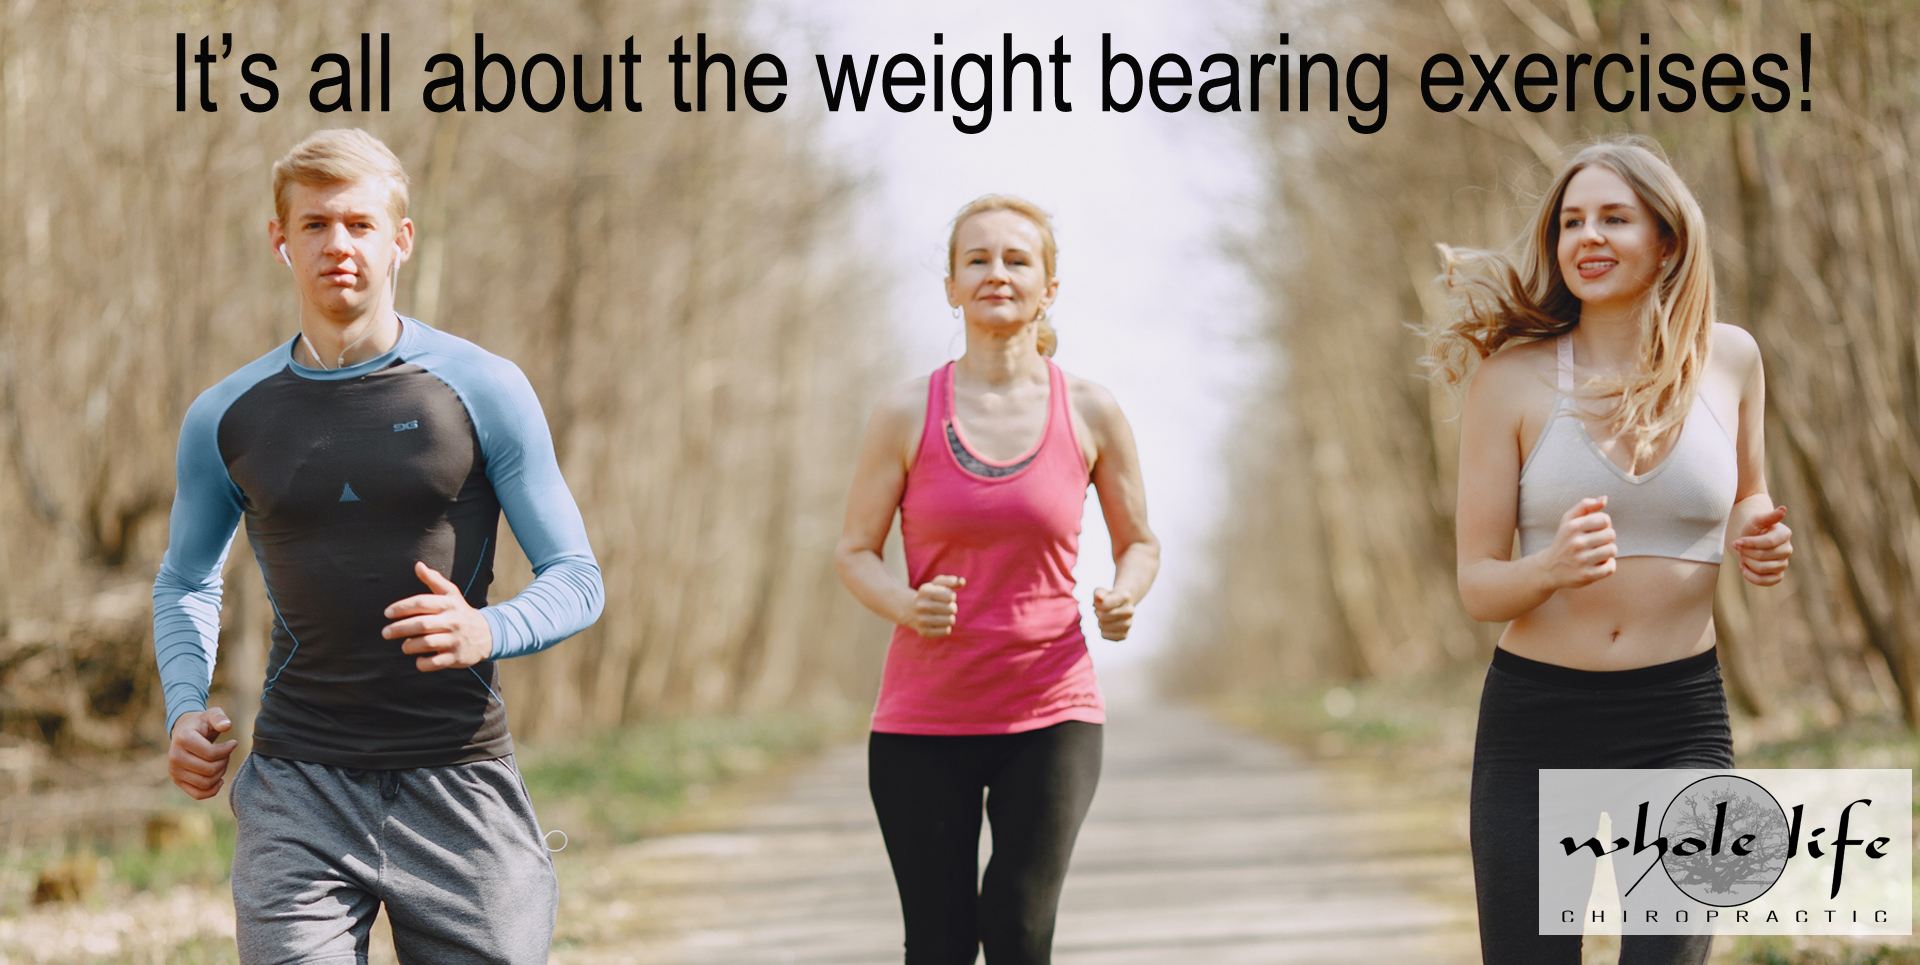 It's all about the weight bearing exercises!